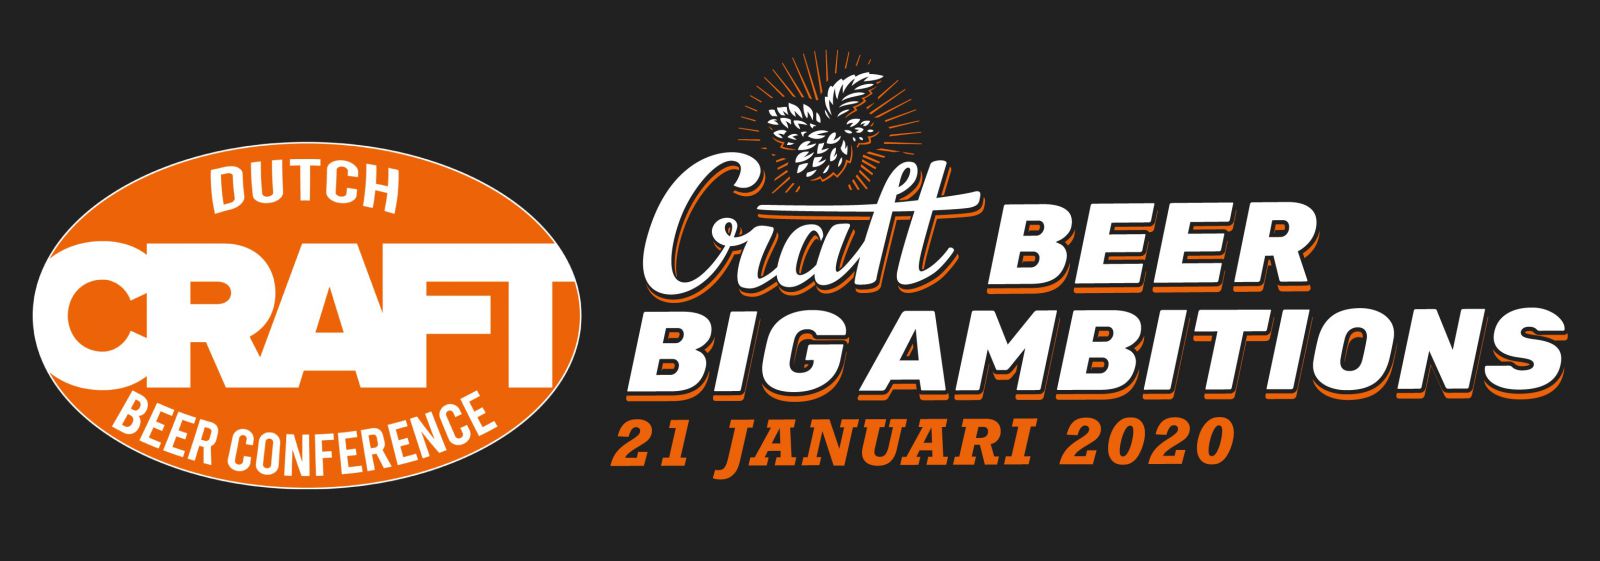 Dutch Craft Beer conference